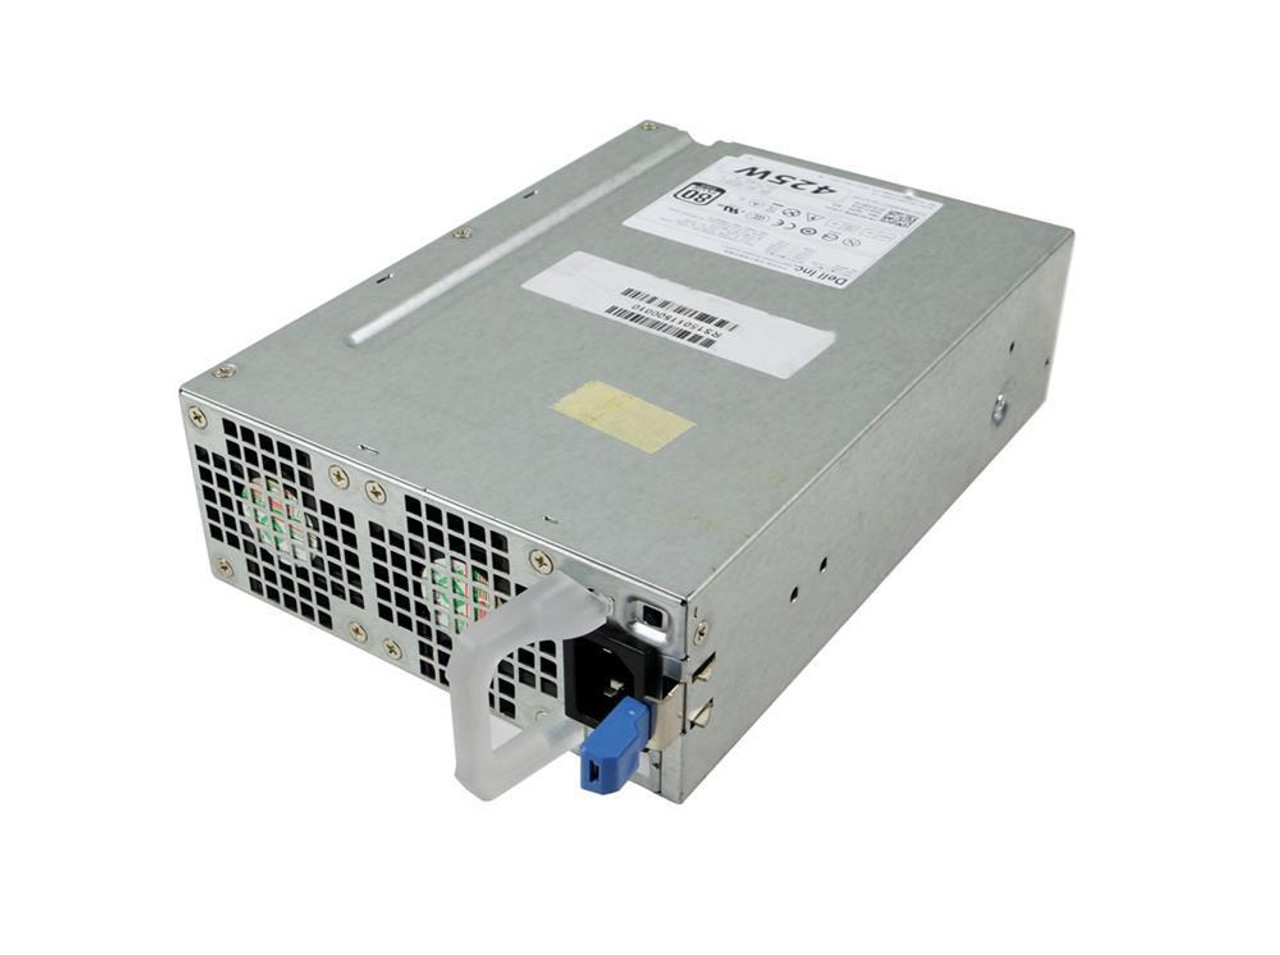 FFD0H Dell 425-Watts Redundant Power Supply for Precision T3610